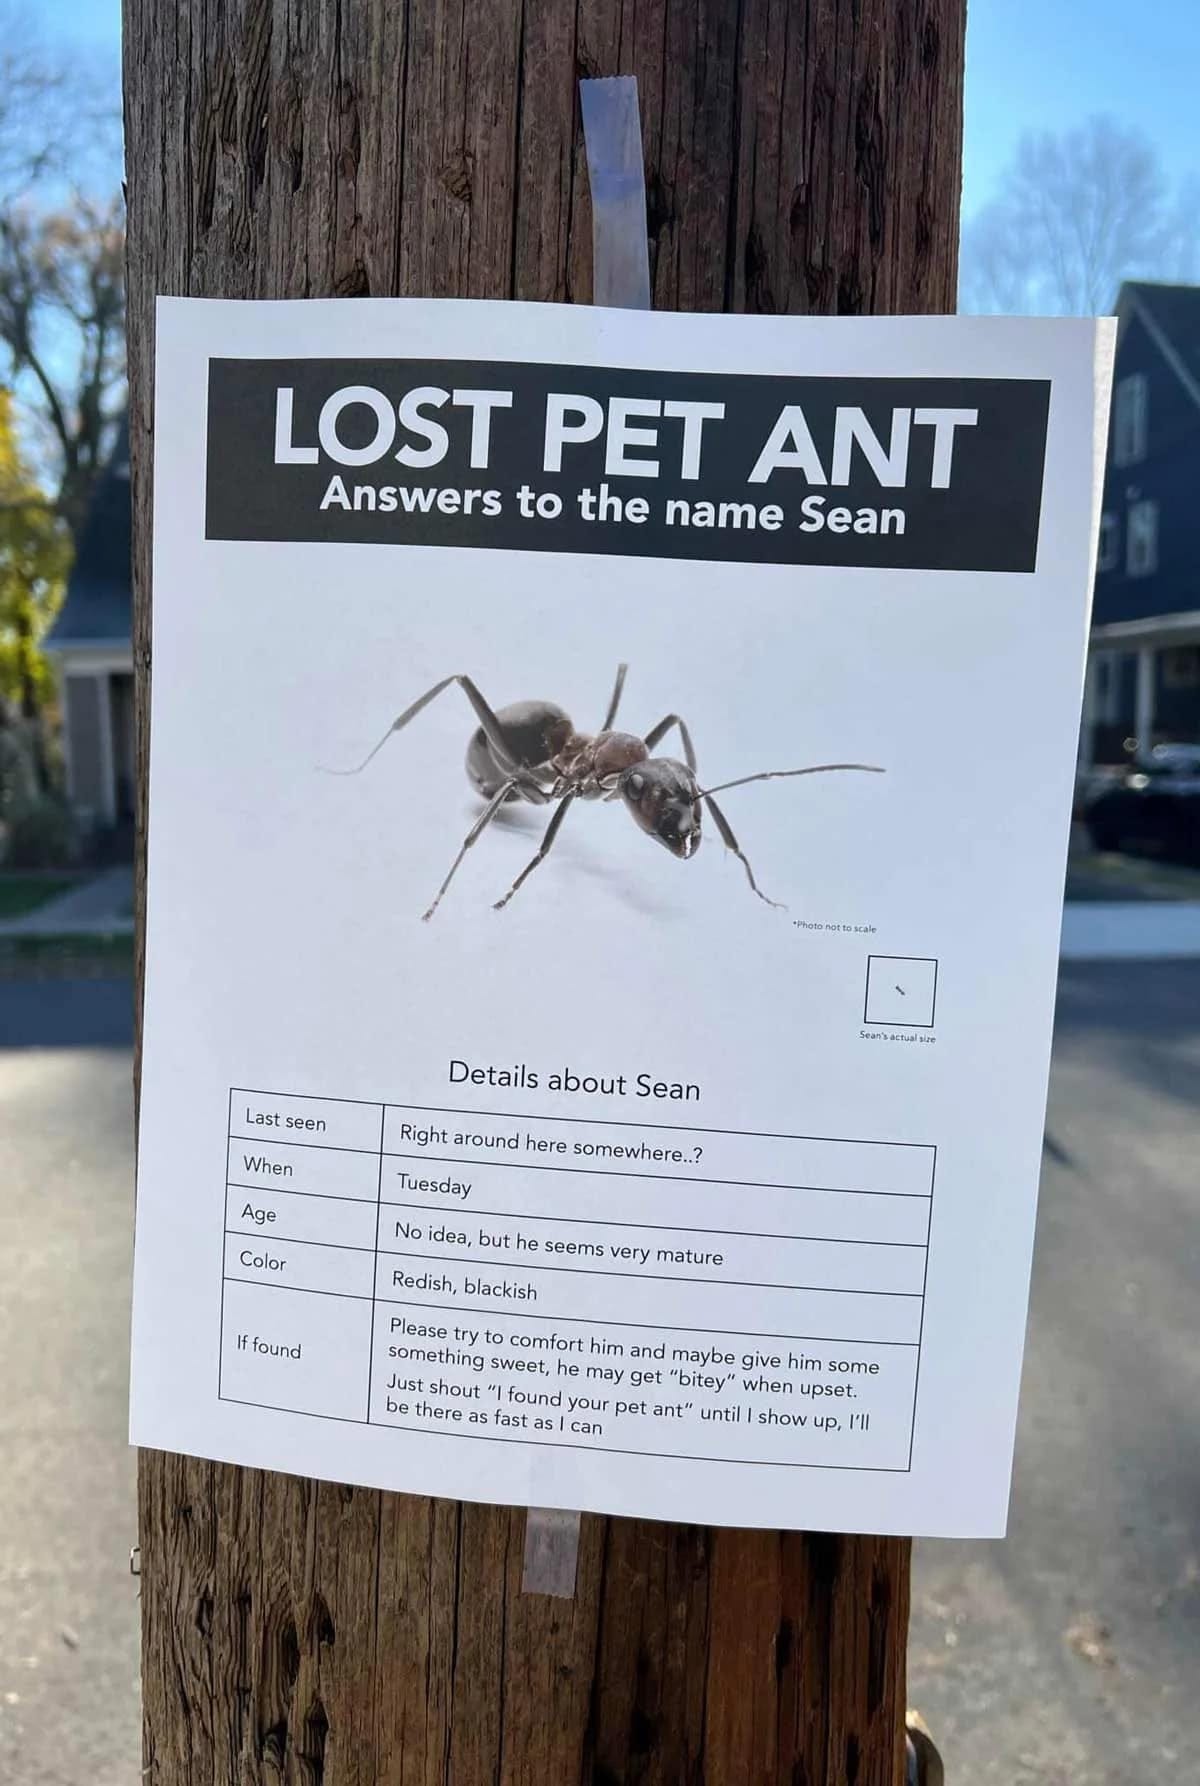 May be an image of outdoors and text that says 'LOST PET ANT Answers to the name Sean Photonottoscale Last seen Details about Sean Sean'sactualaire When Right around here somewhere..? Age Tuesday Color No dea, but ne seems very mature Redish, blackish Please Iffound comfort him and maybe give some Just shout sweet, ge "bitey" when upse there your pet ant" until show up, can'